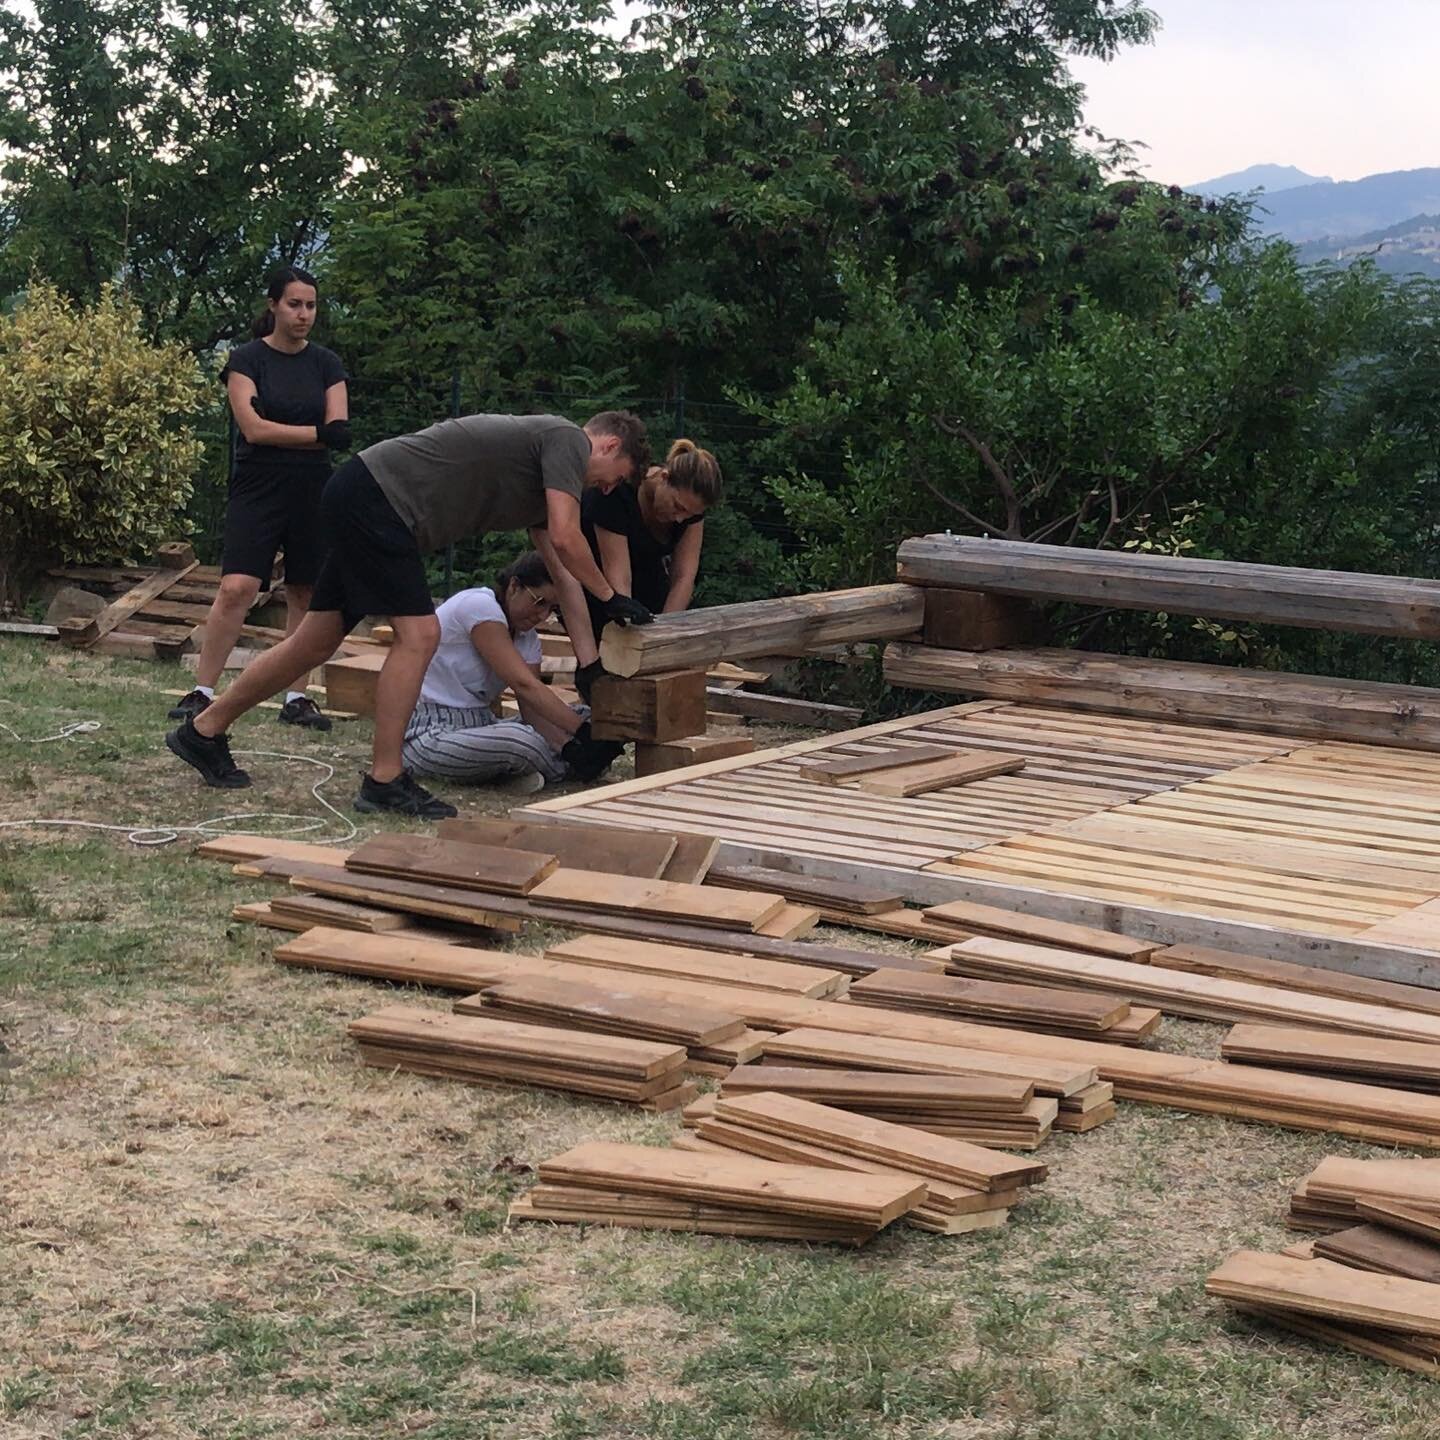 Design and build for disassembly 2021
San Ginesio, Italy
Organised by @architecture_and_cooperation 
#circularity #disassembly  #naturalmaterials #bioconstruction 

 #sustainability #ecofriendly #design #greenarchitecture #sustainable #bamboo #sustai